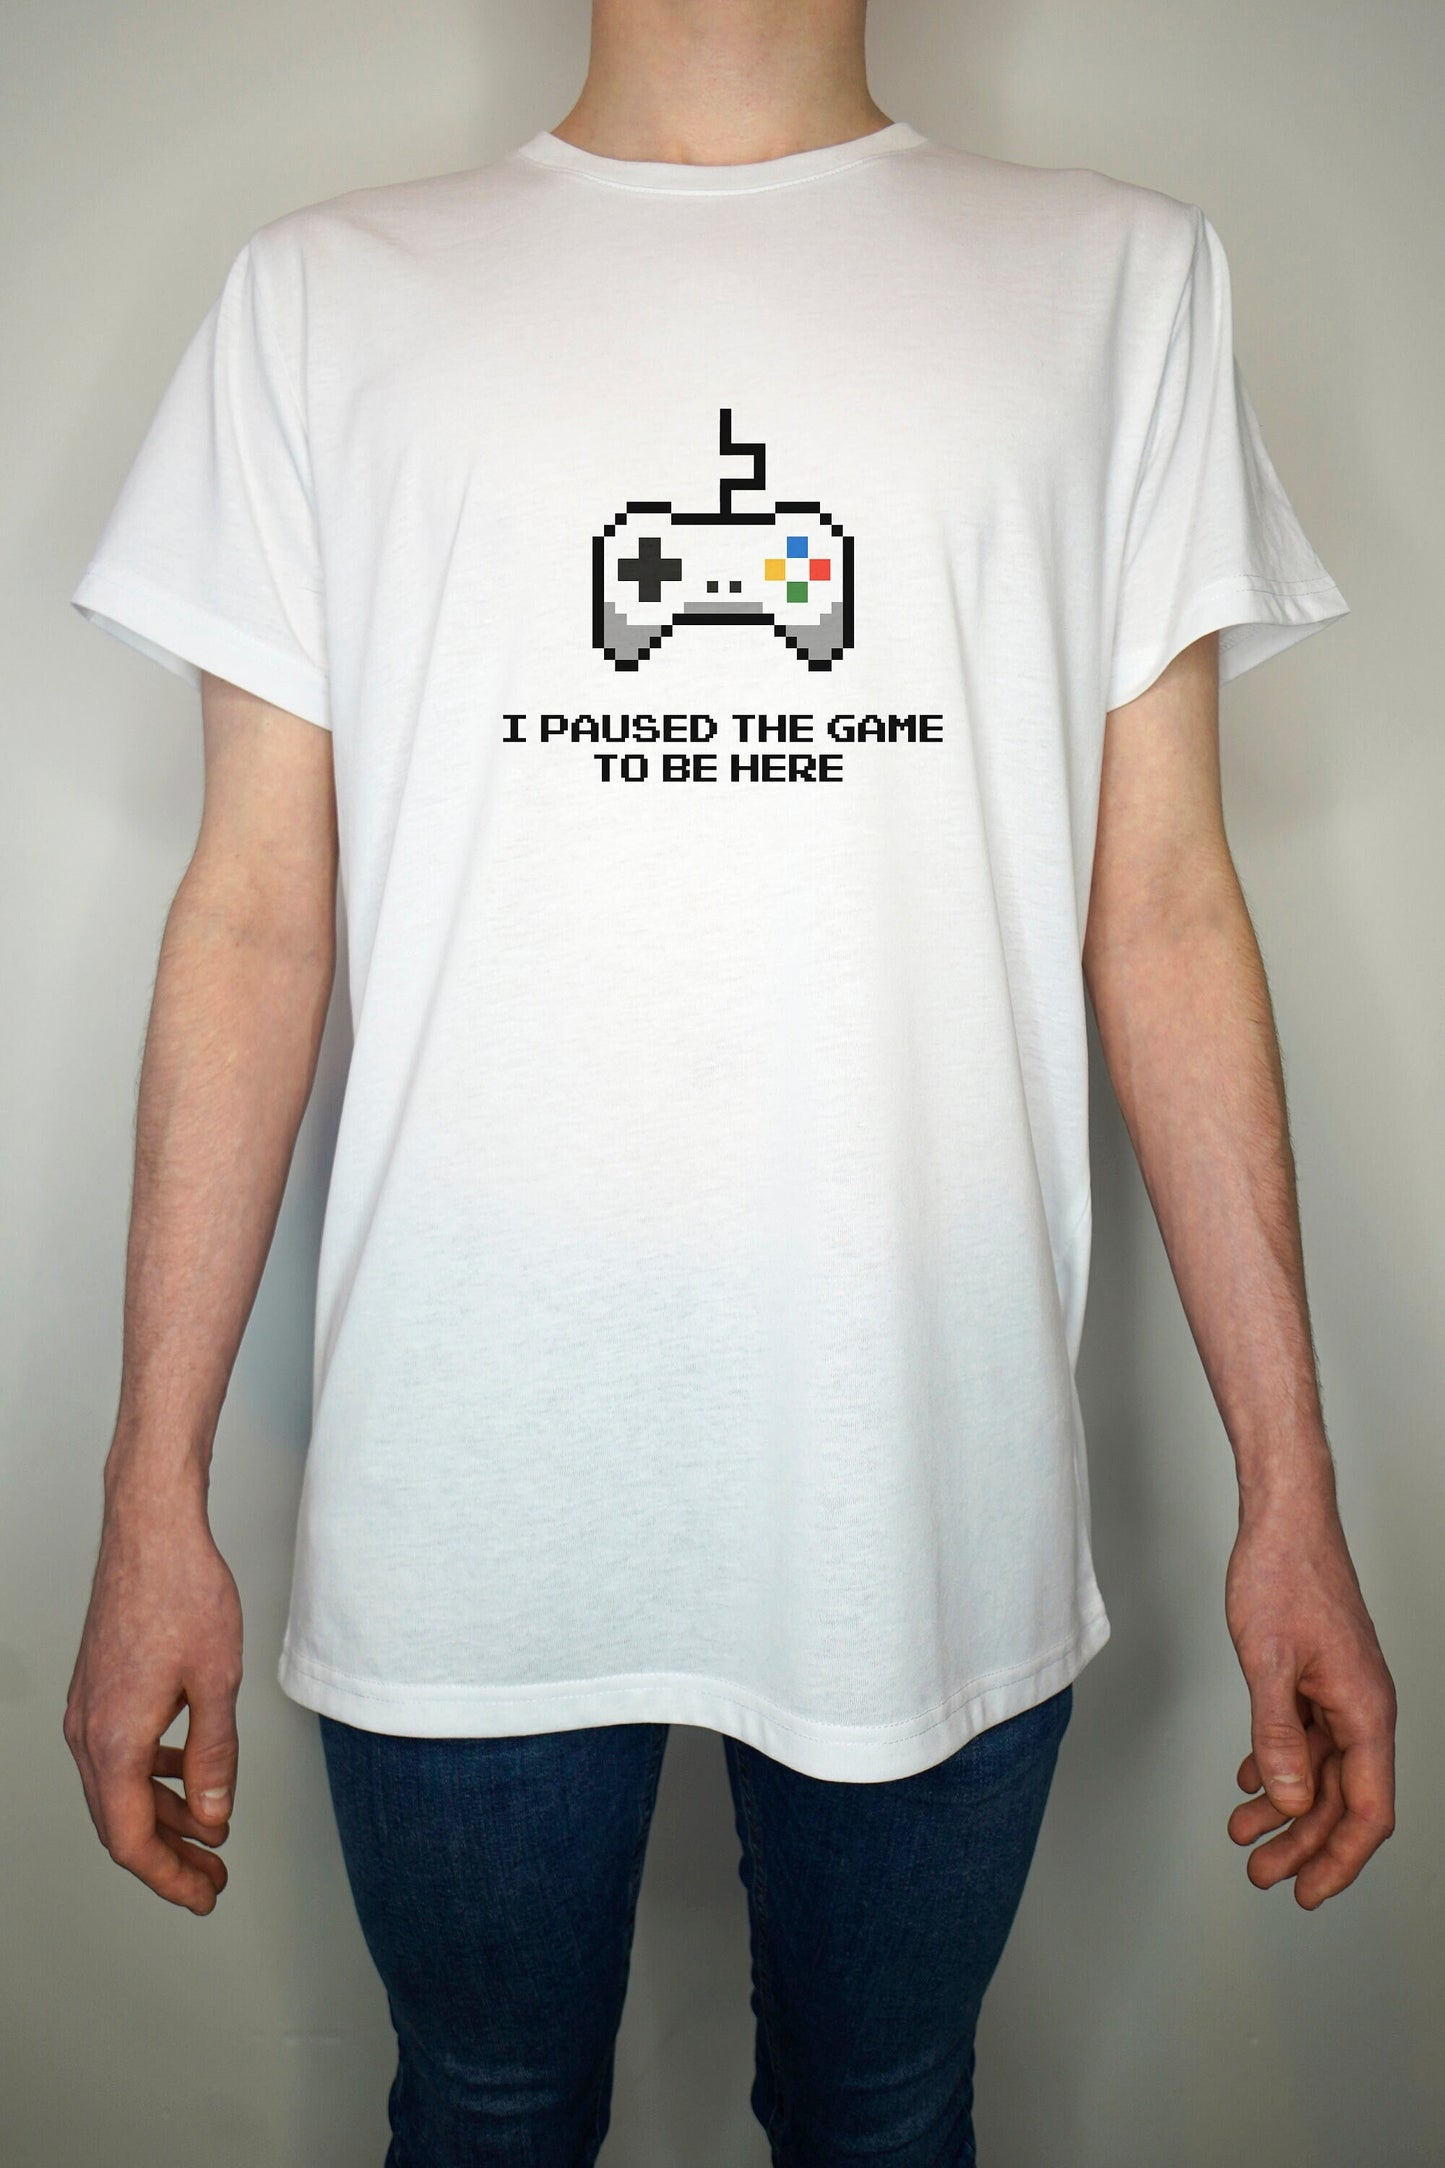 Gamer T shirt - Paused the game to be here -  8bit cartoon gamer - Premium Quality Summer Light weight 65/35 Polyester Cotton